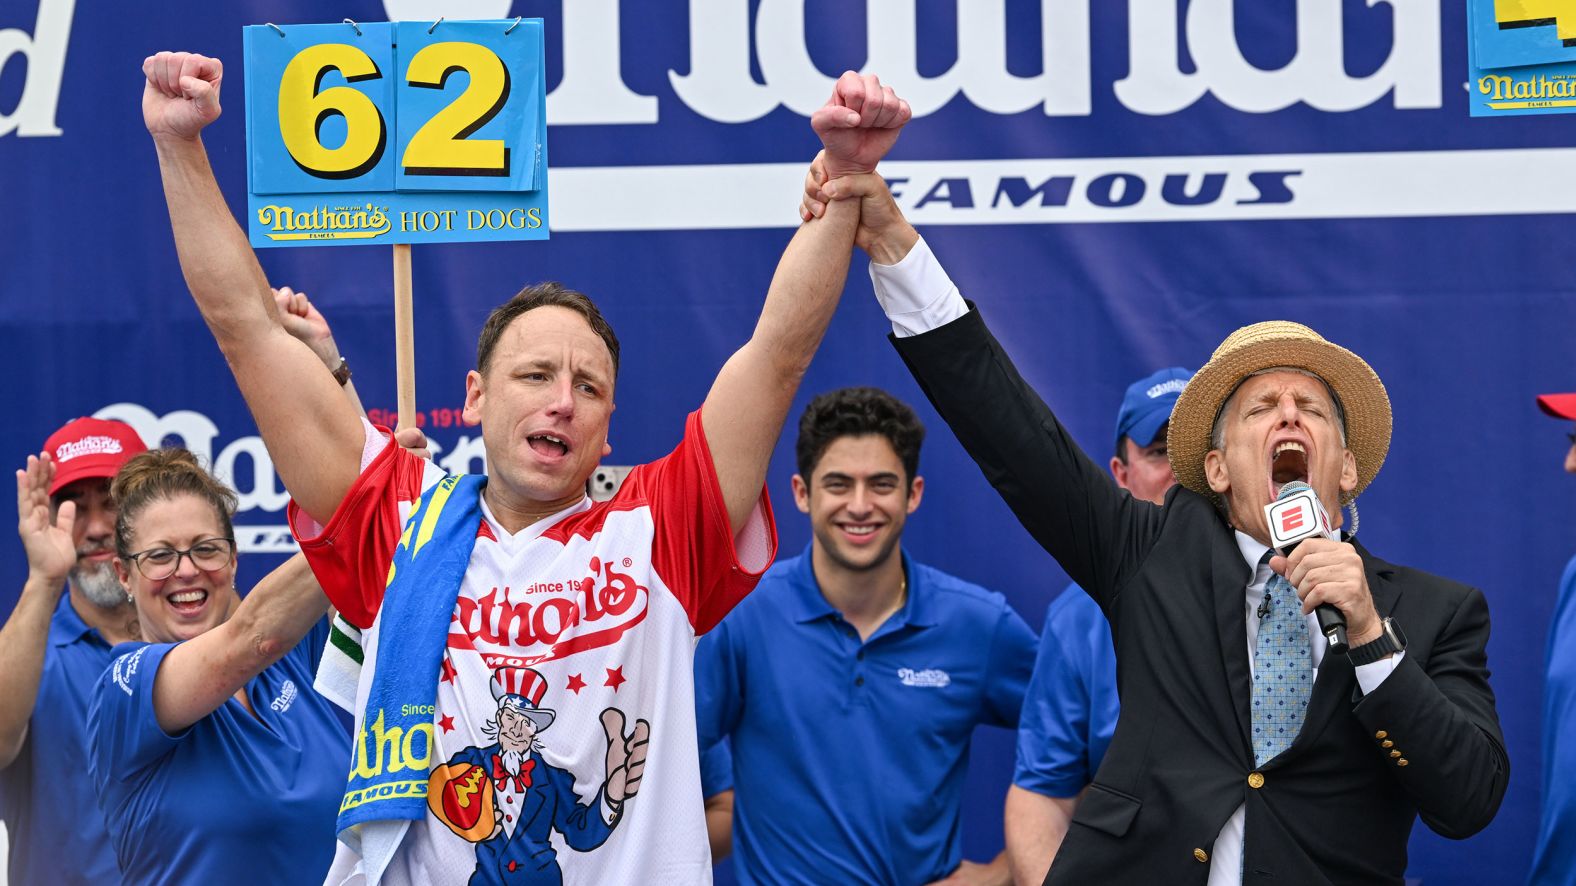 Joey Chestnut raises his arms in celebration Tuesday after successfully defending his title in the Nathan's Famous International Hot Dog Eating Contest, which takes place every year in New York. He ate 62 hot dogs and buns in 10 minutes.